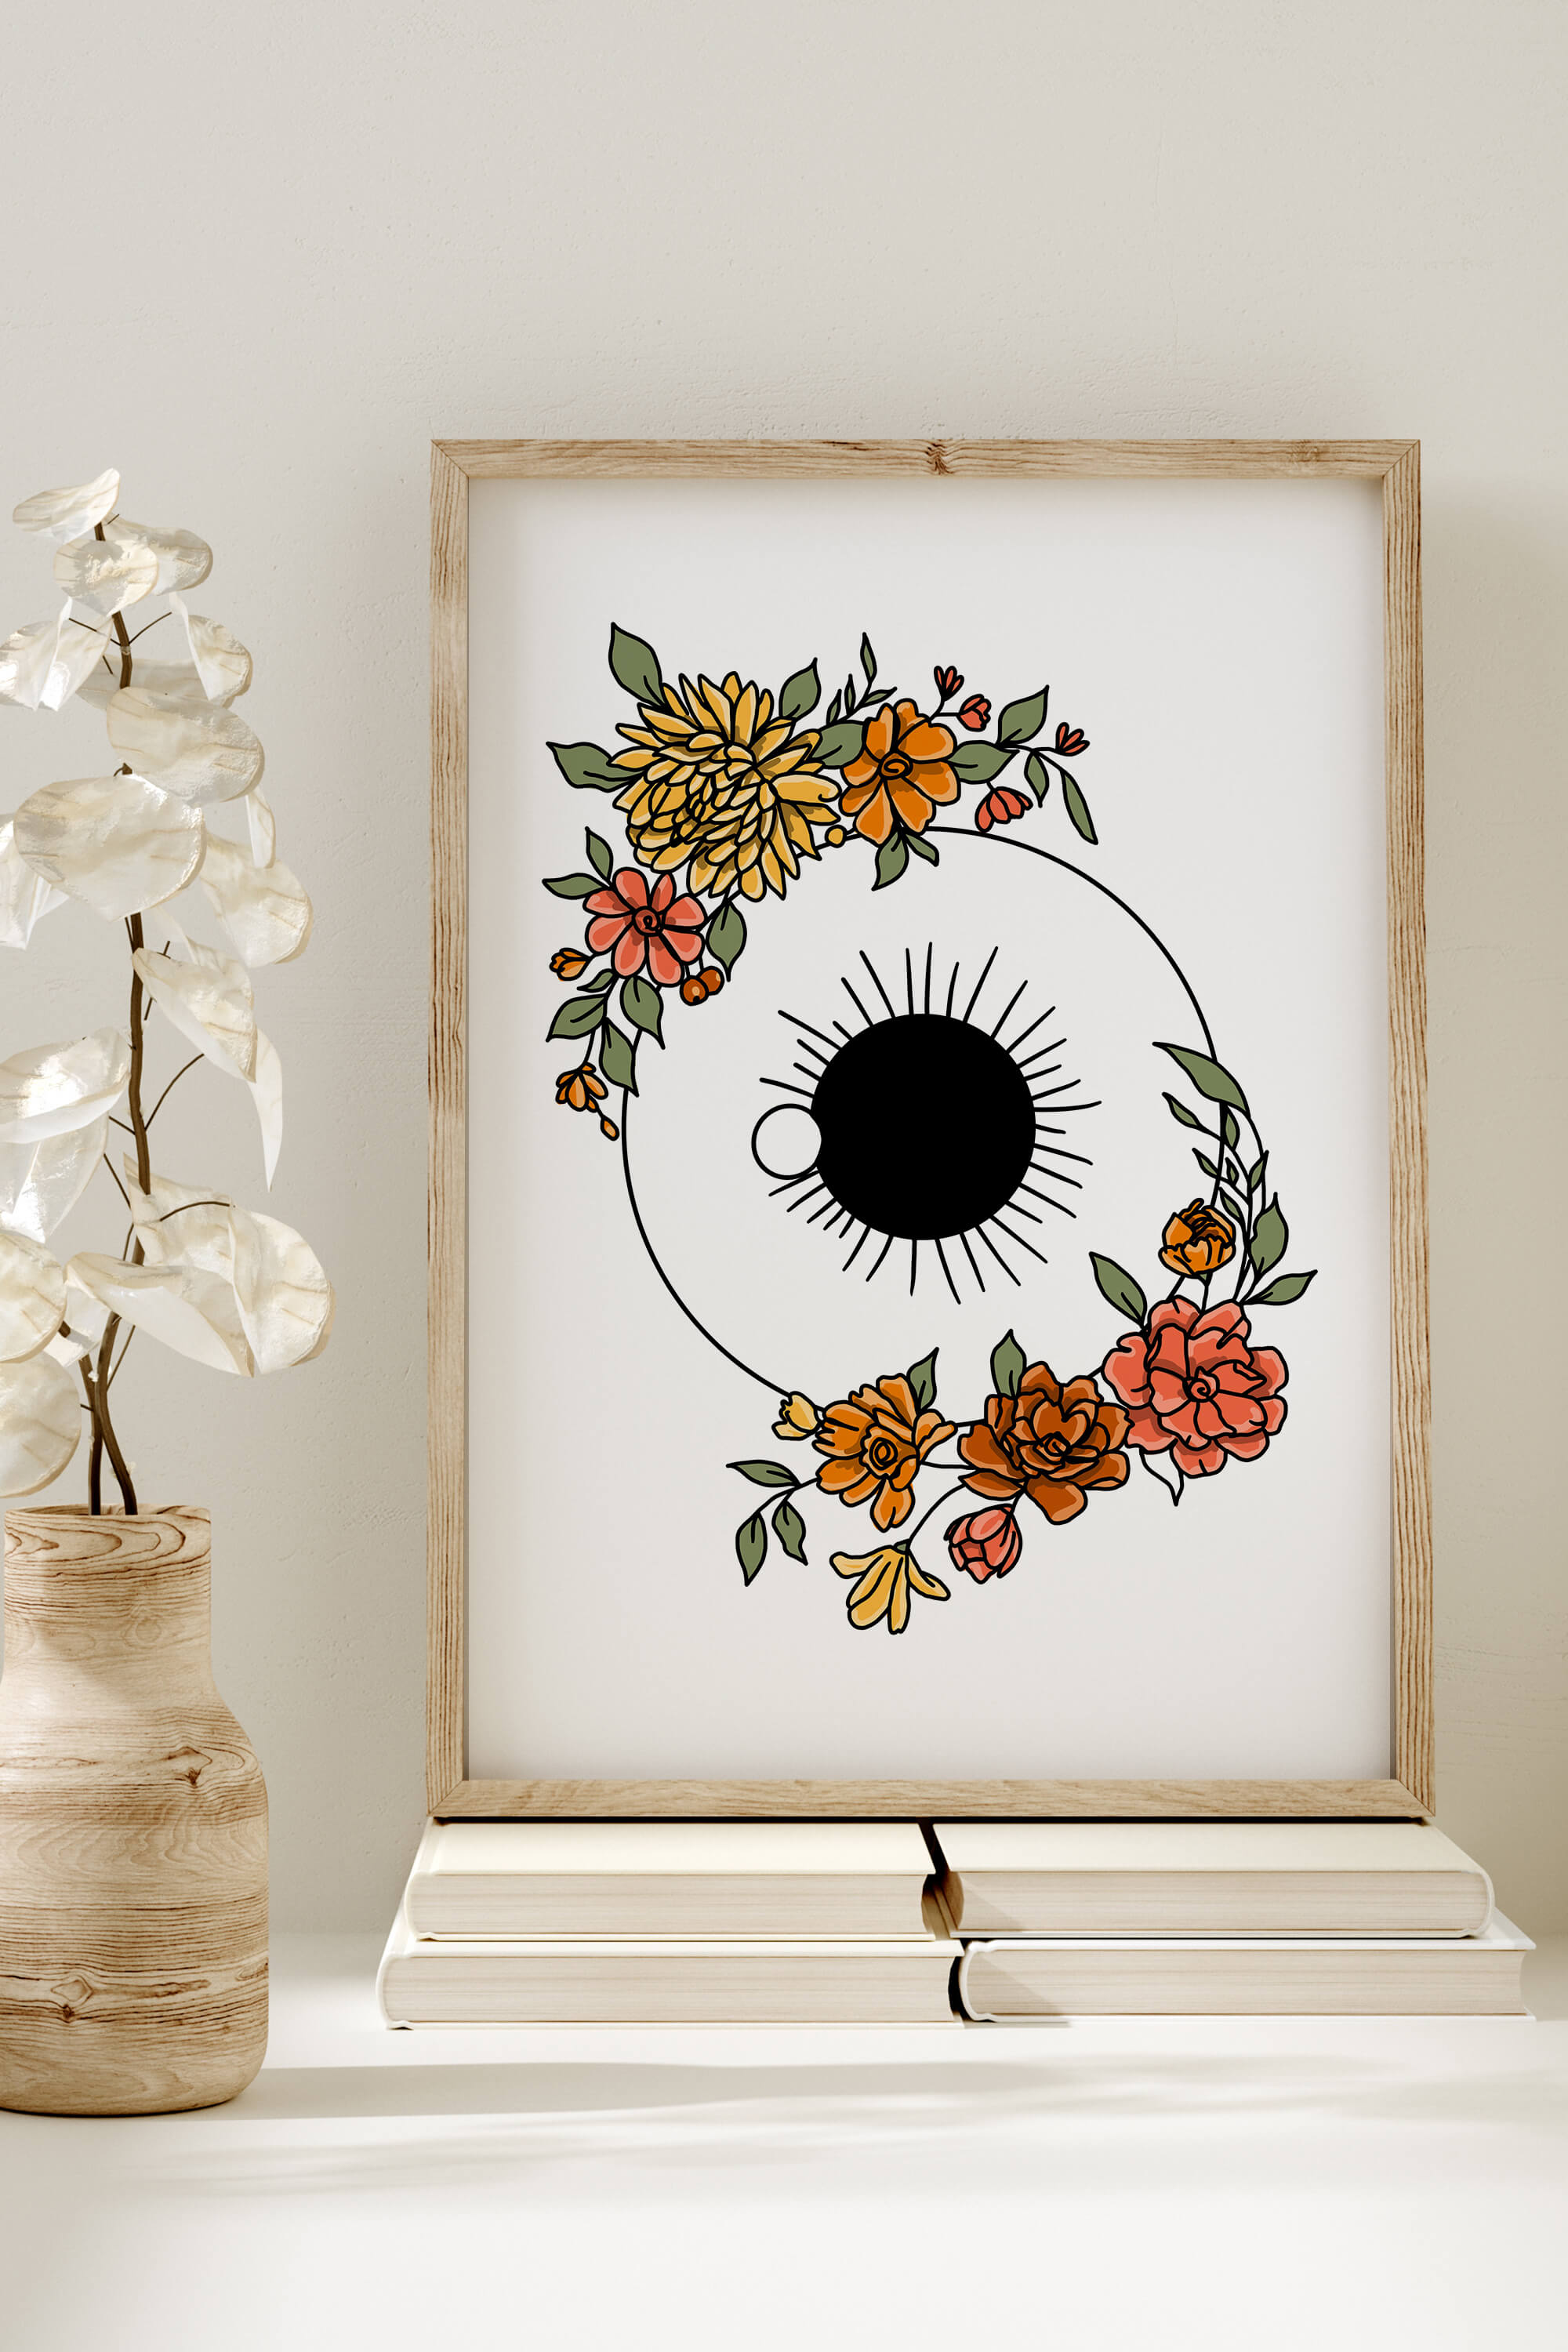 Experience the delicate dance between science and art in vibrant hues. Every line tells a story of the eye's complex beauty, creating a dynamic masterpiece. Add energy and creativity to your space with this colorful eye anatomy art.